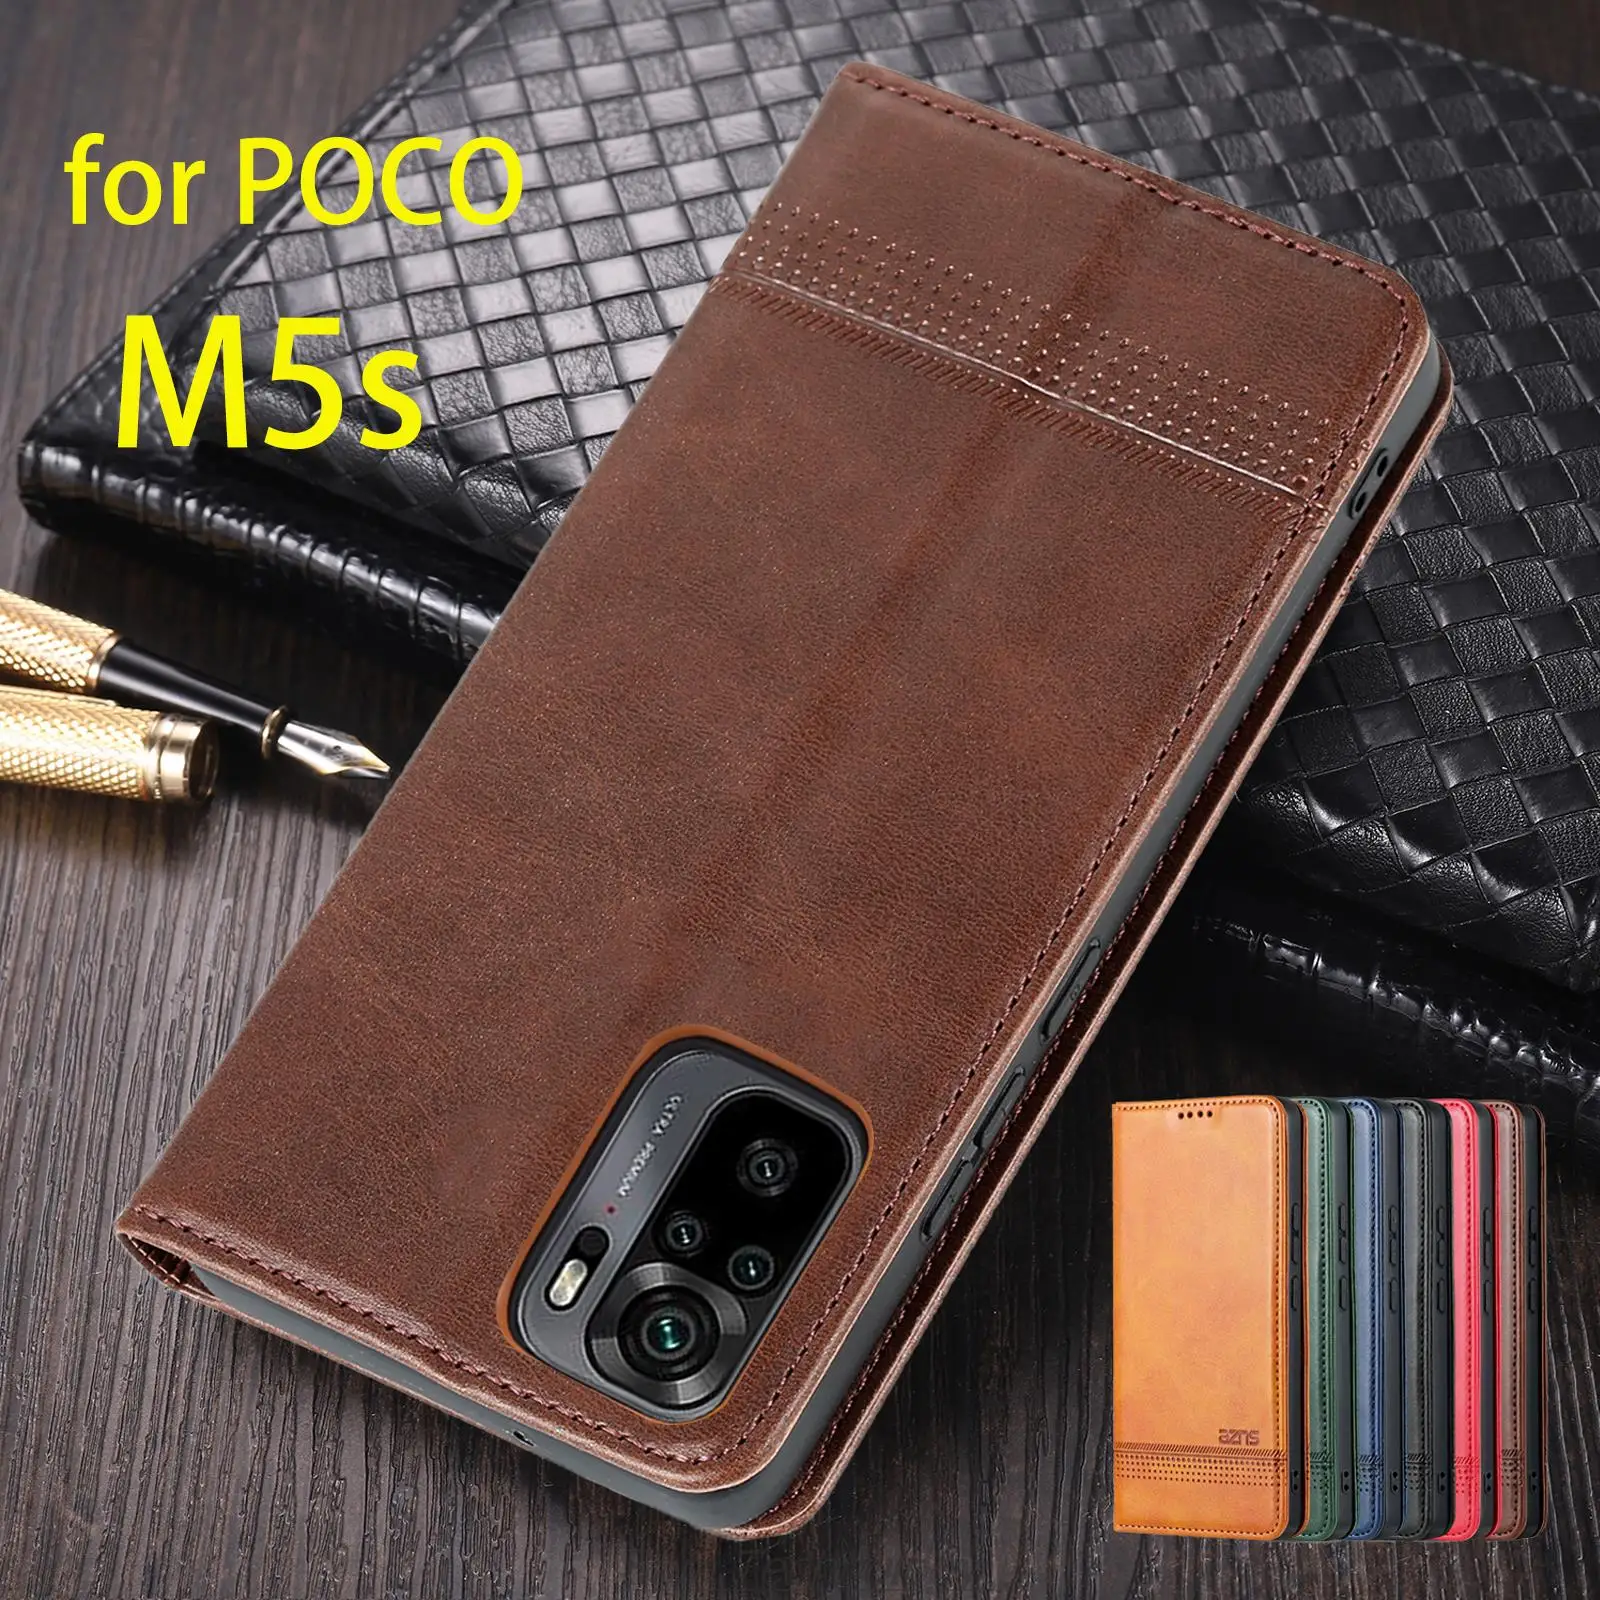 

Deluxe Magnetic Adsorption Leather Case for Xiaomi POCOPHONE POCO M5s Flip Cover Protective Fitted Case Capa Fundas Coque